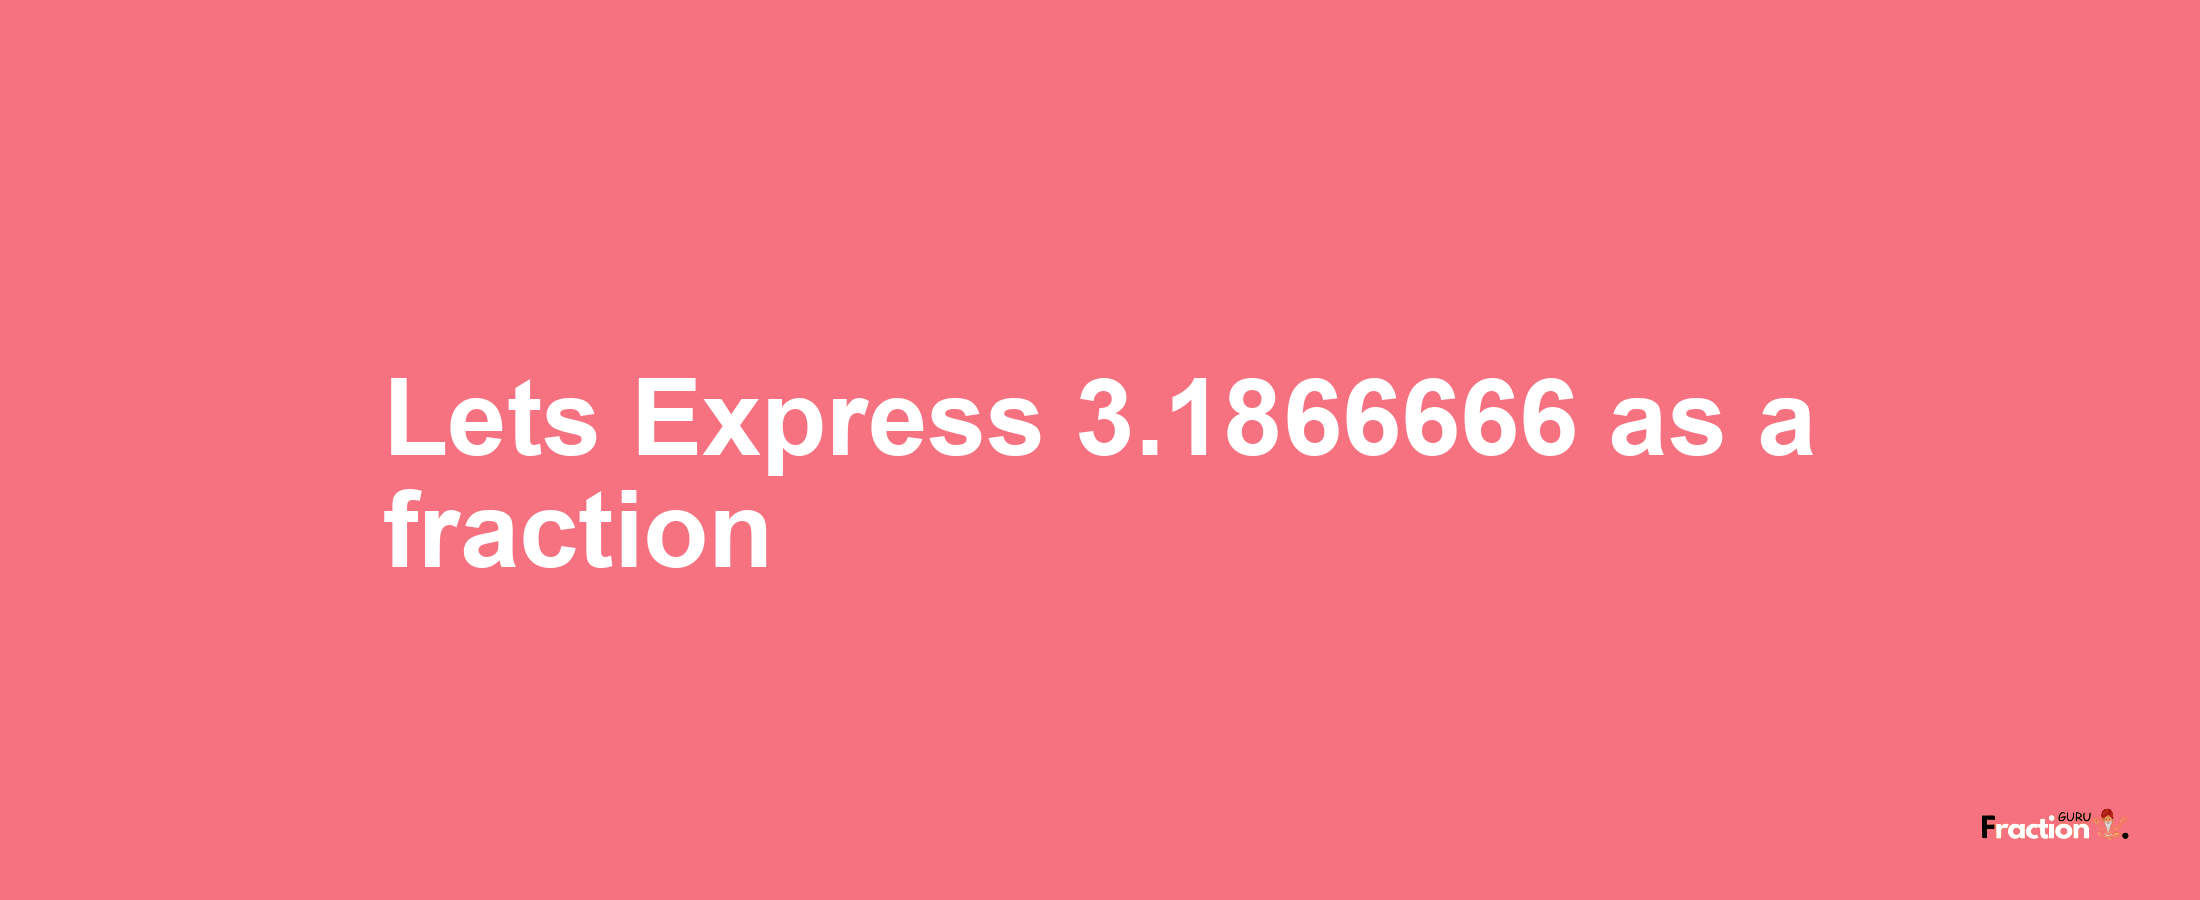 Lets Express 3.1866666 as afraction